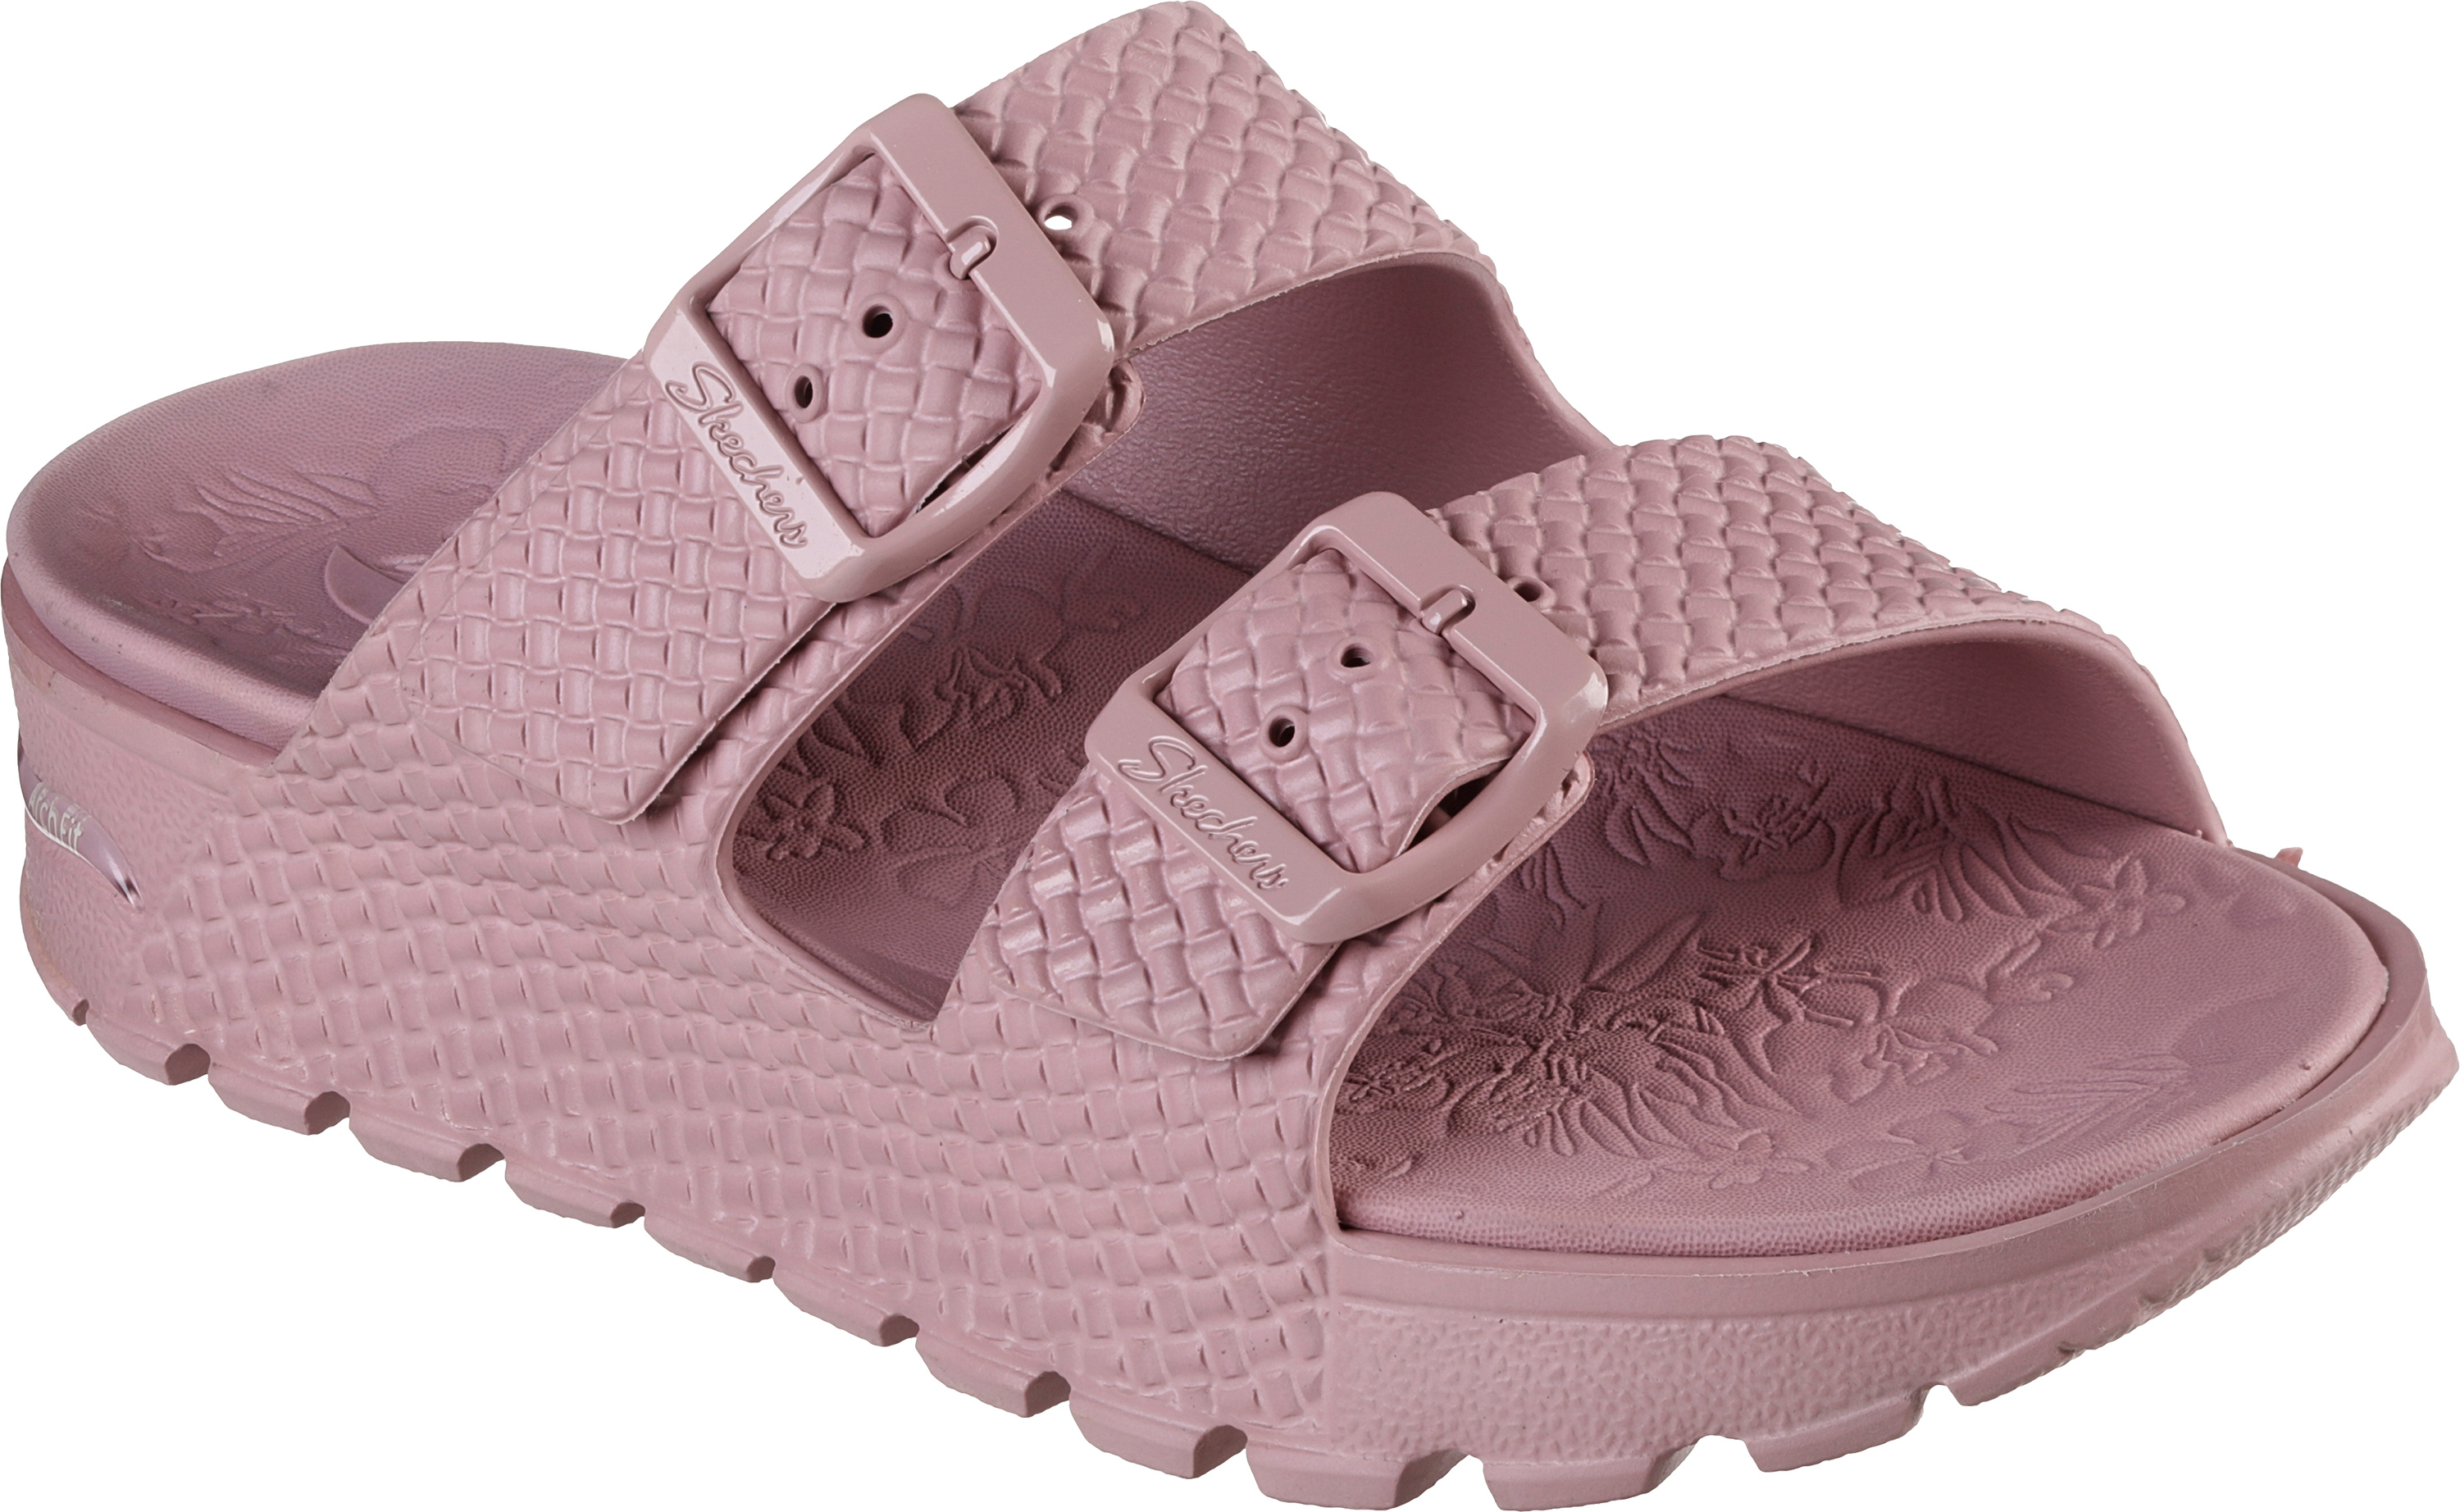 Find Your Perfect Orthopaedic Sandals with Arch Support